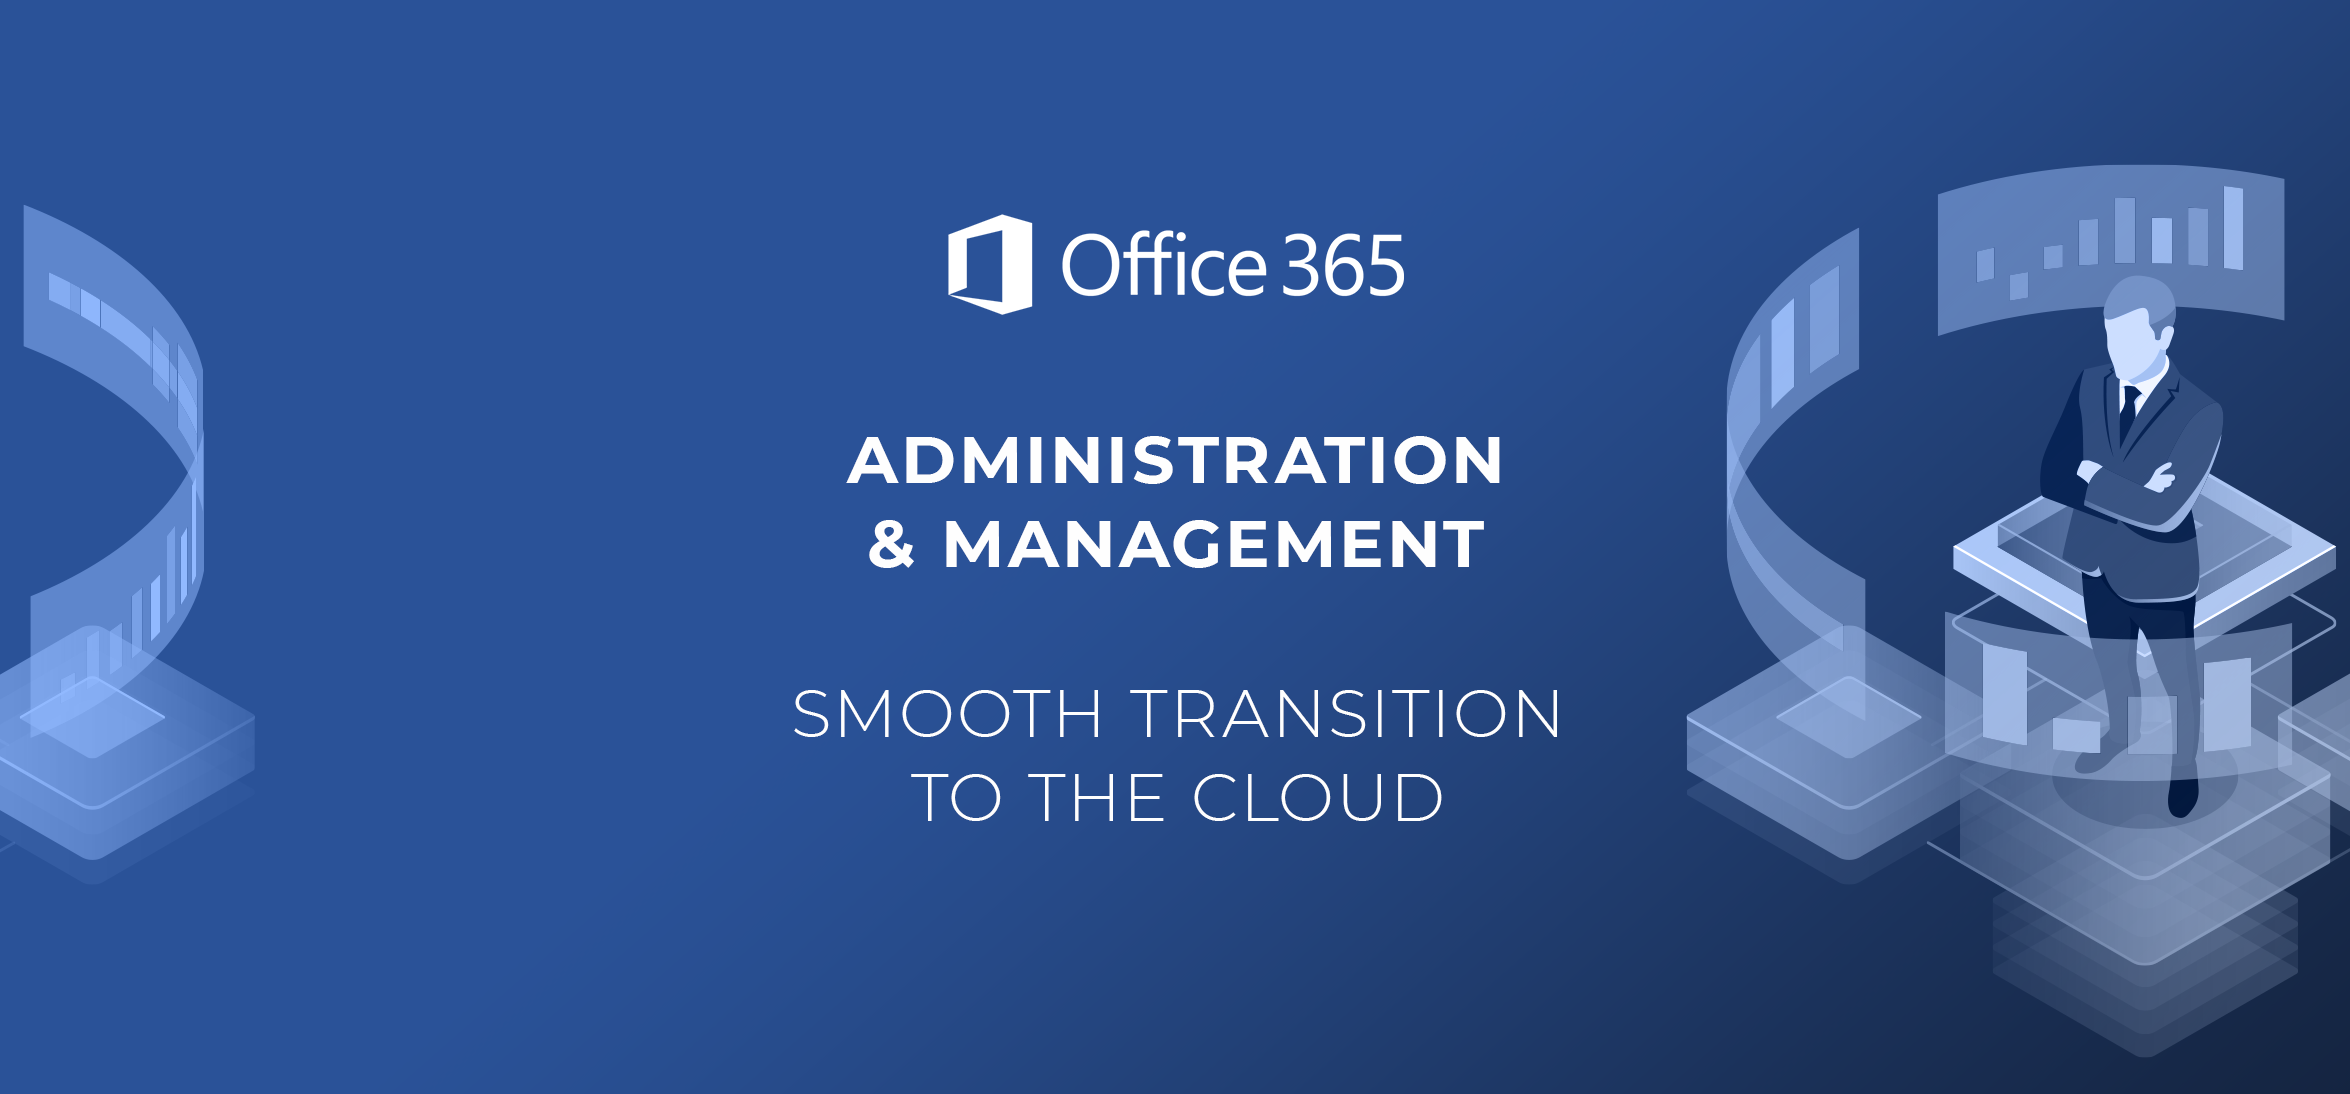 Microsoft Office 365 Administration Services in Julian CA, 92036